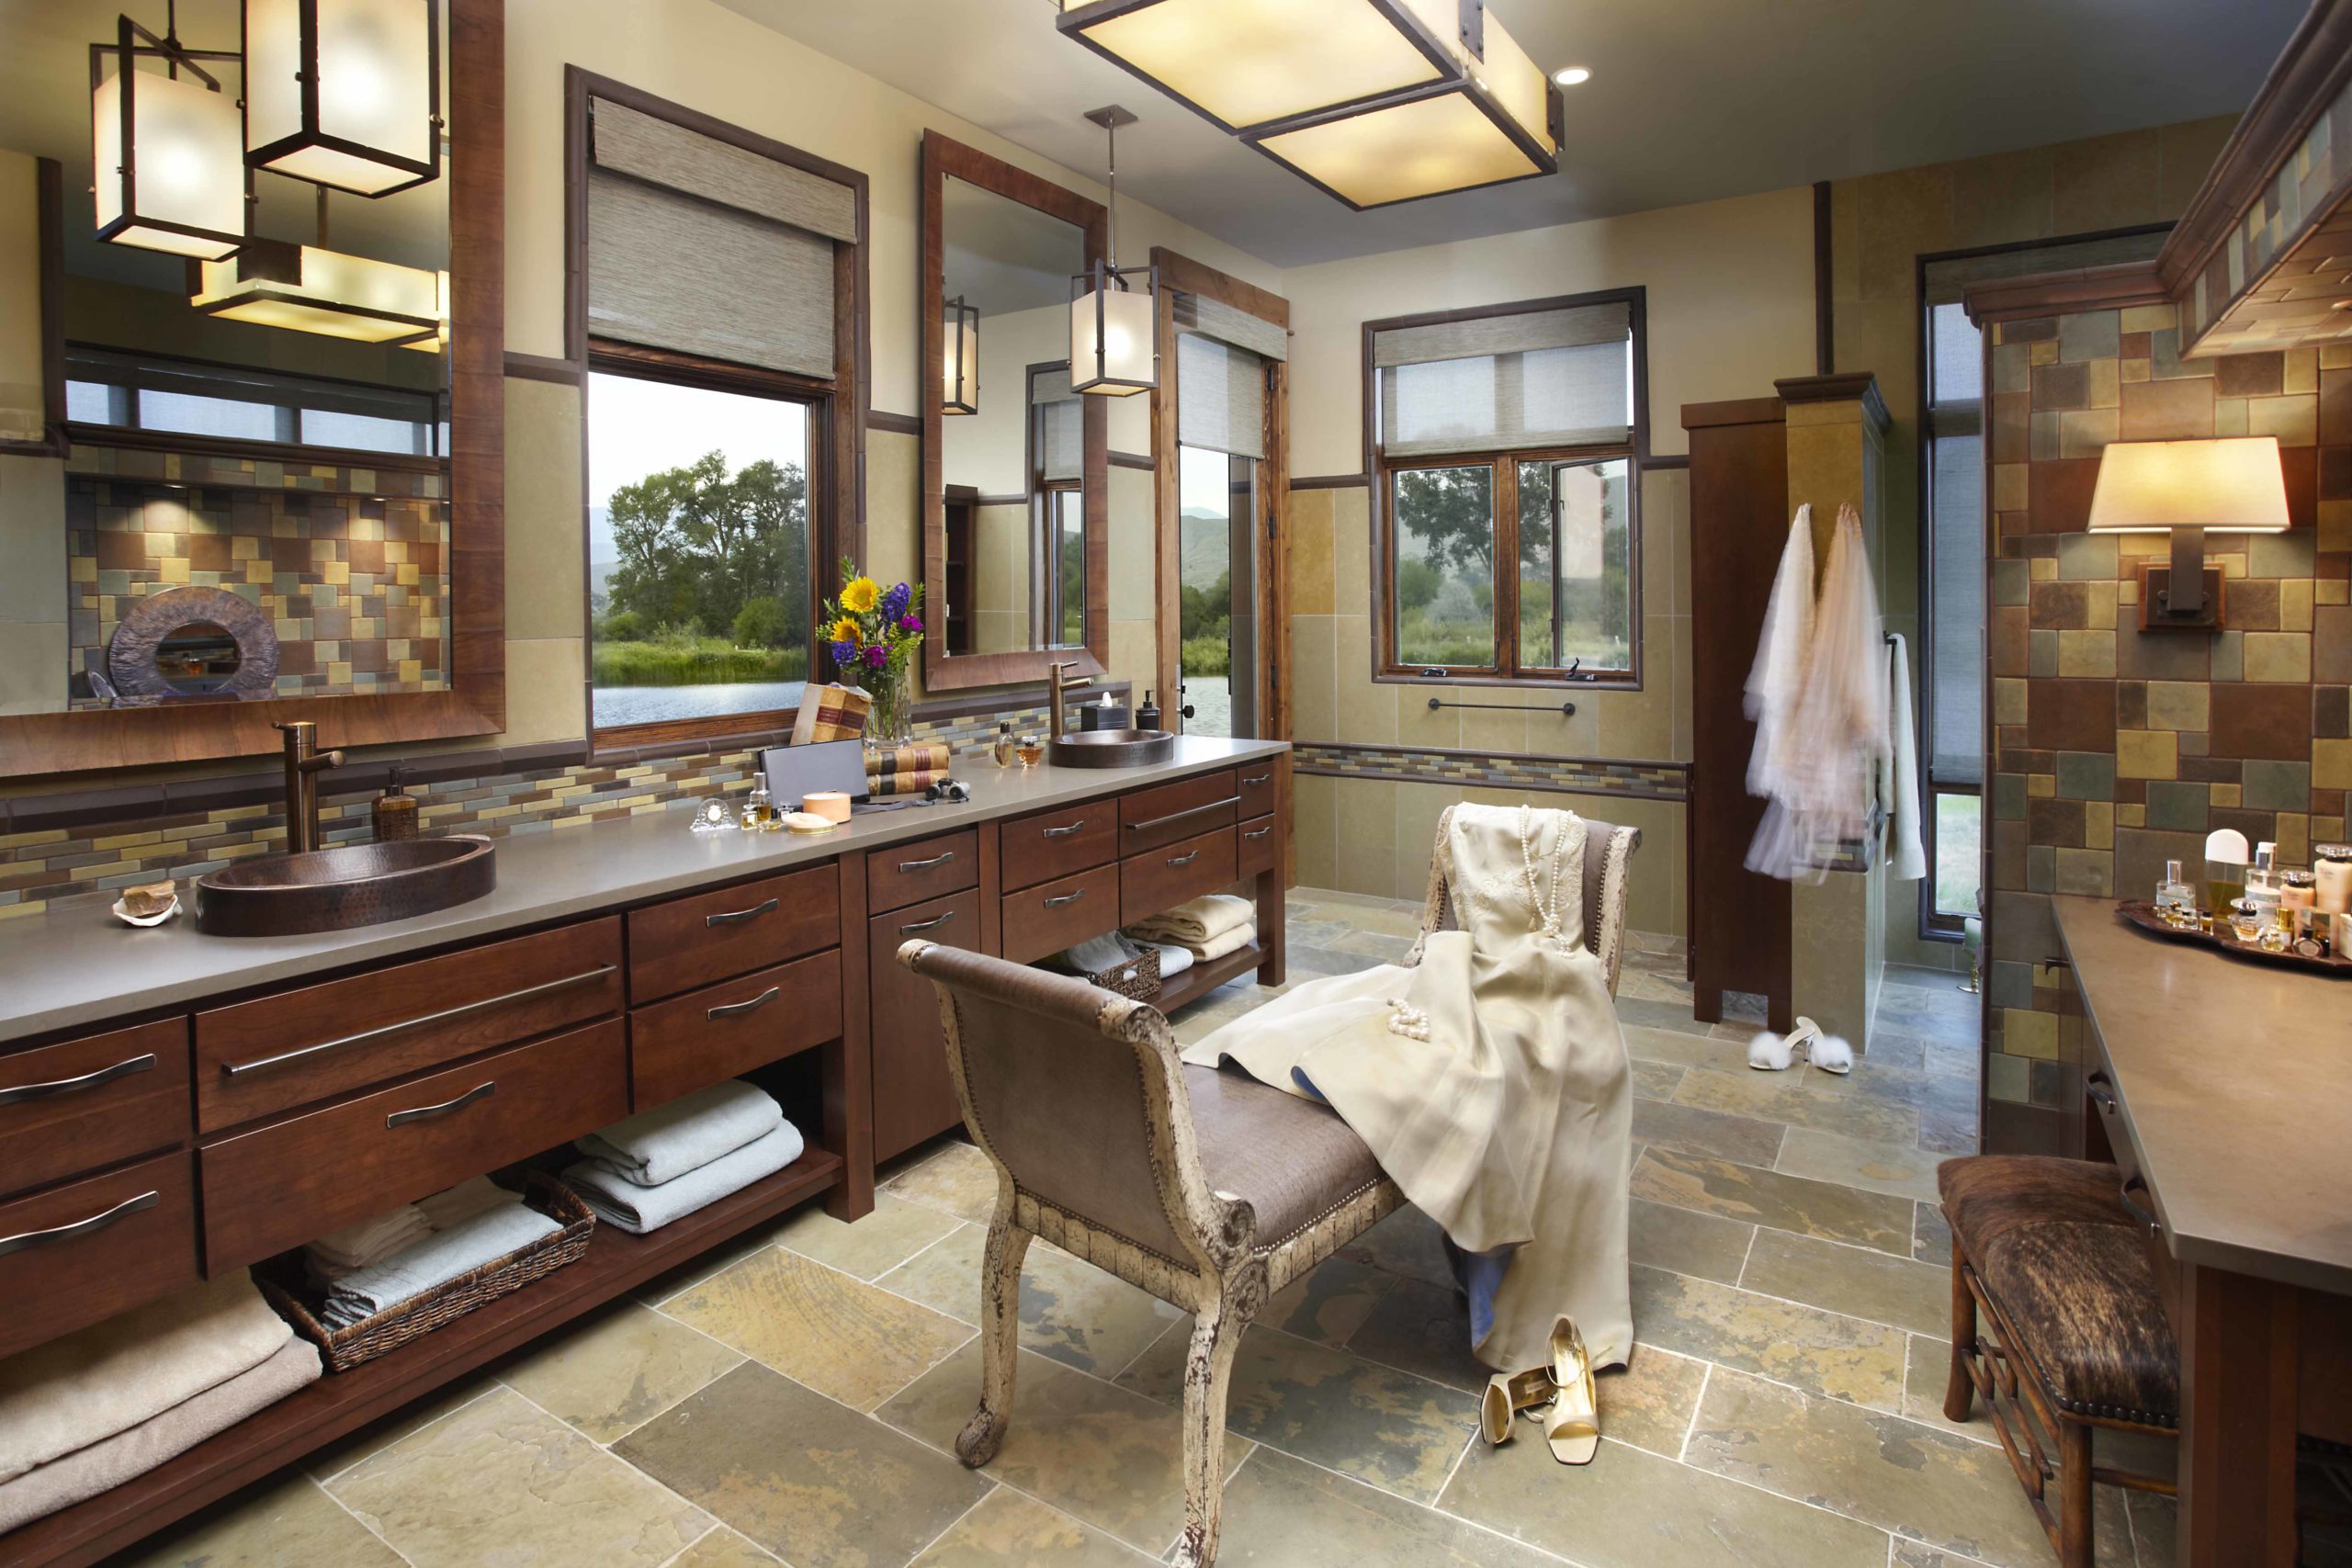 Big bathroom with tiled floors and walls and a long wooden vanity with two sinks